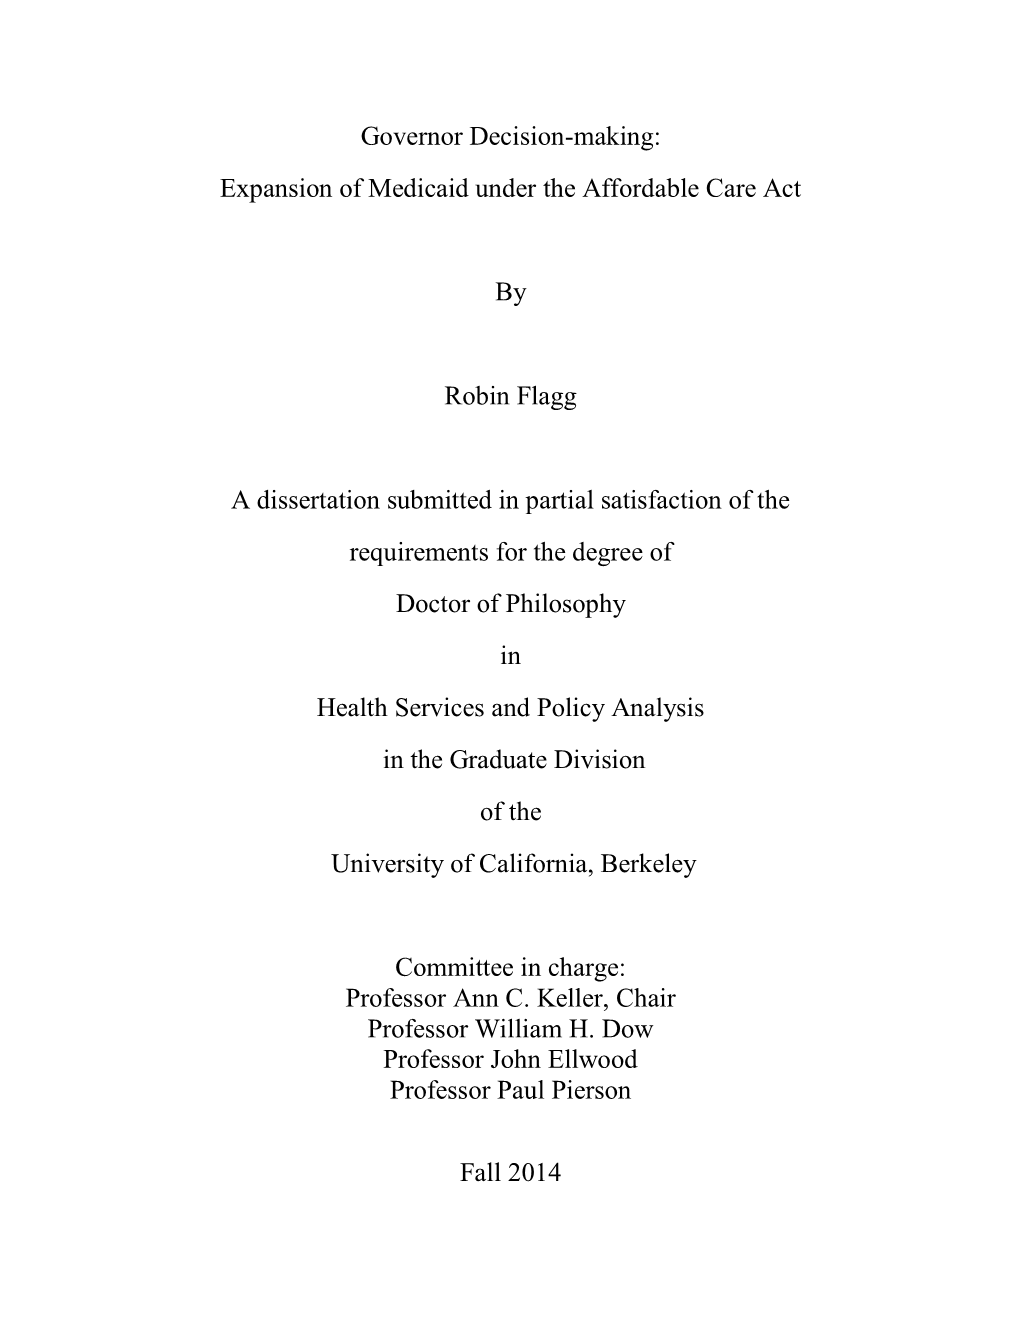 Governor Decision-Making: Expansion of Medicaid Under the Affordable Care Act